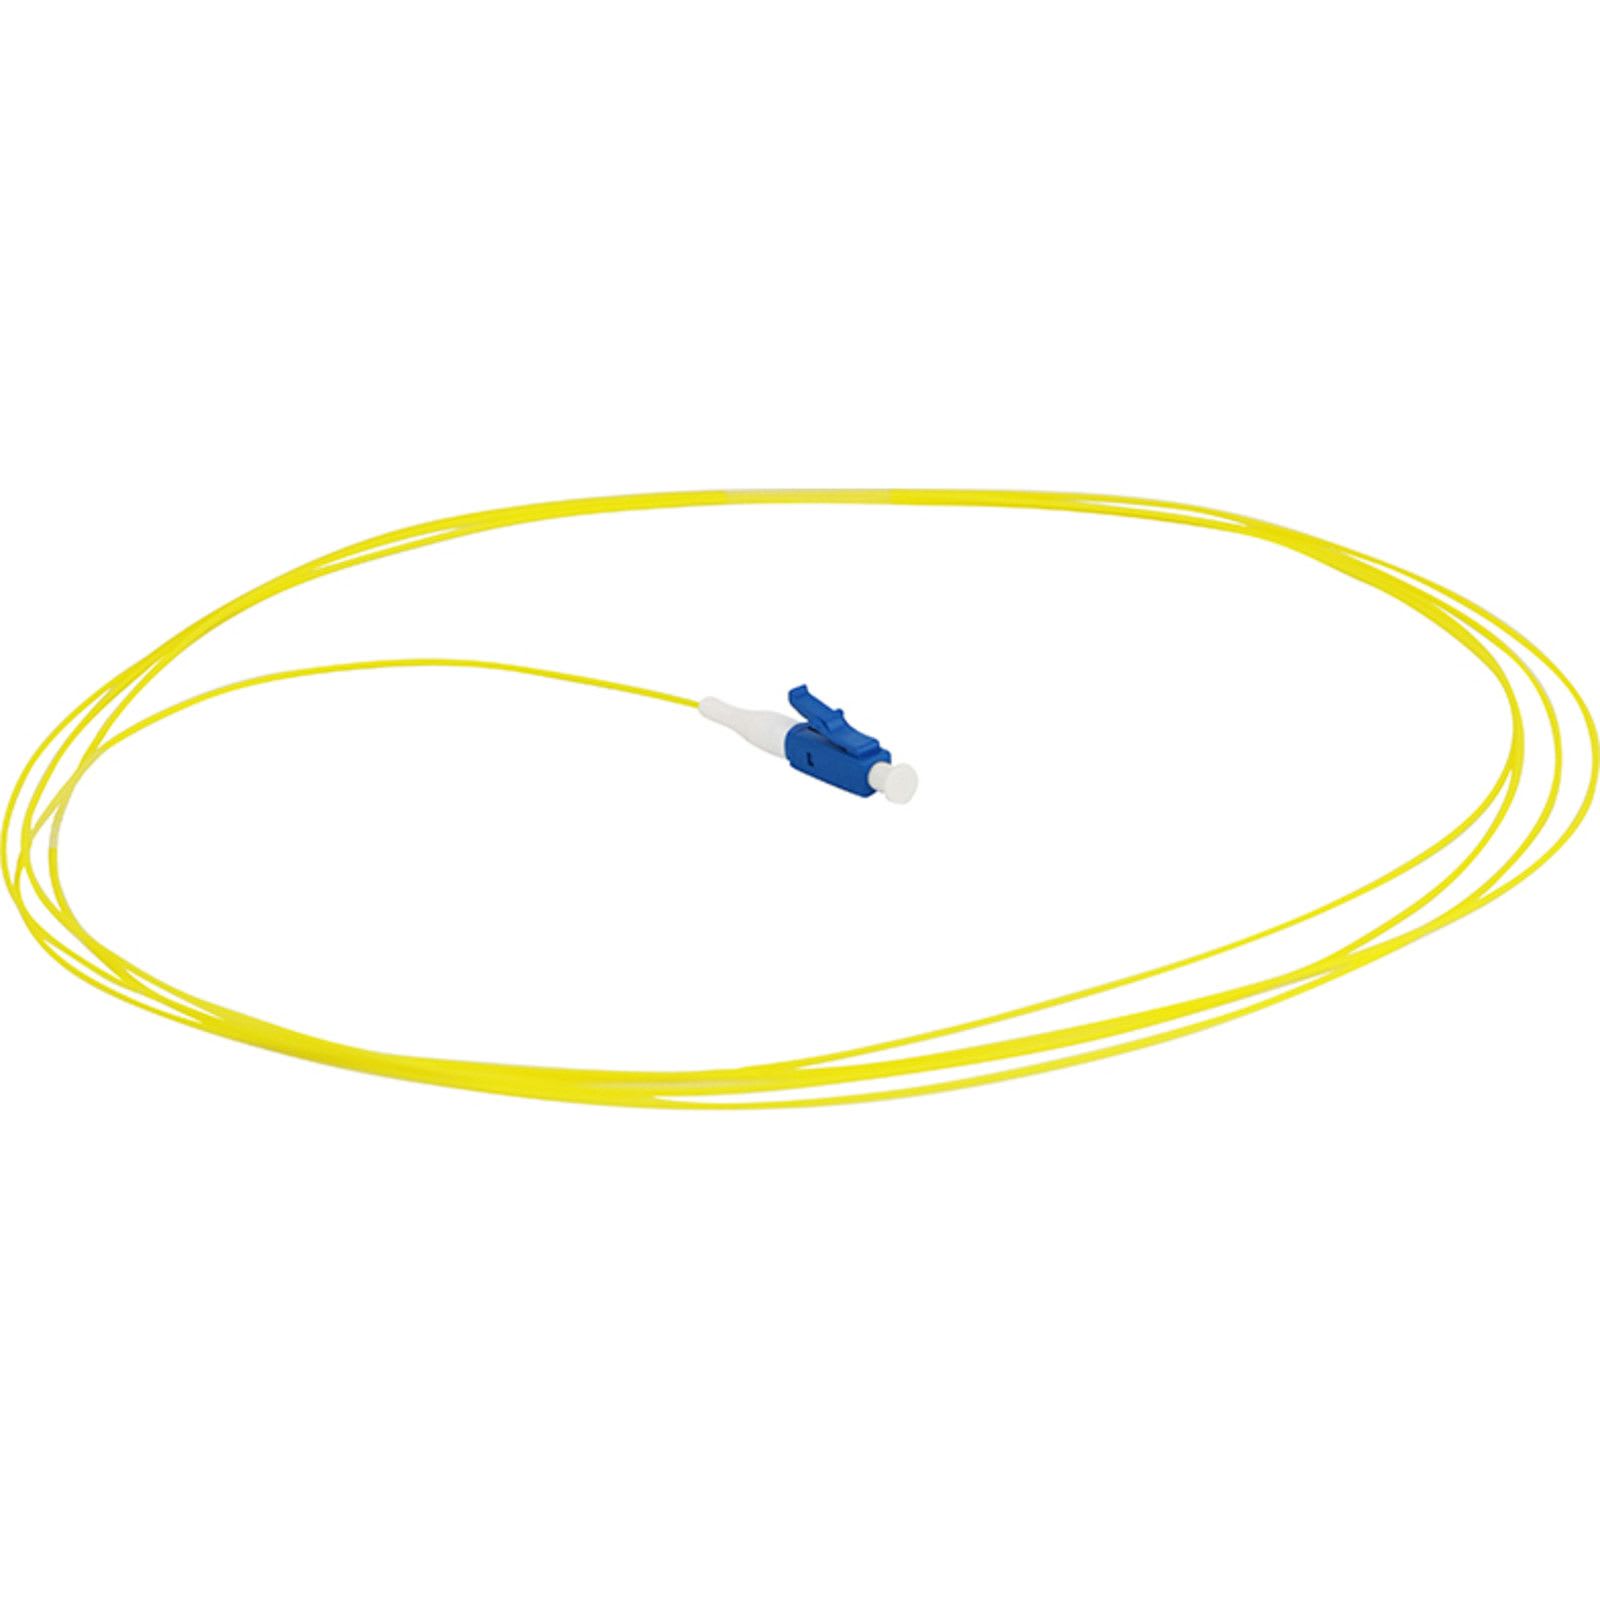 Excel Networking Solutions - Fibre Pigtail OS2 9/125 LC/UPC Yellow 12-pack - 1m